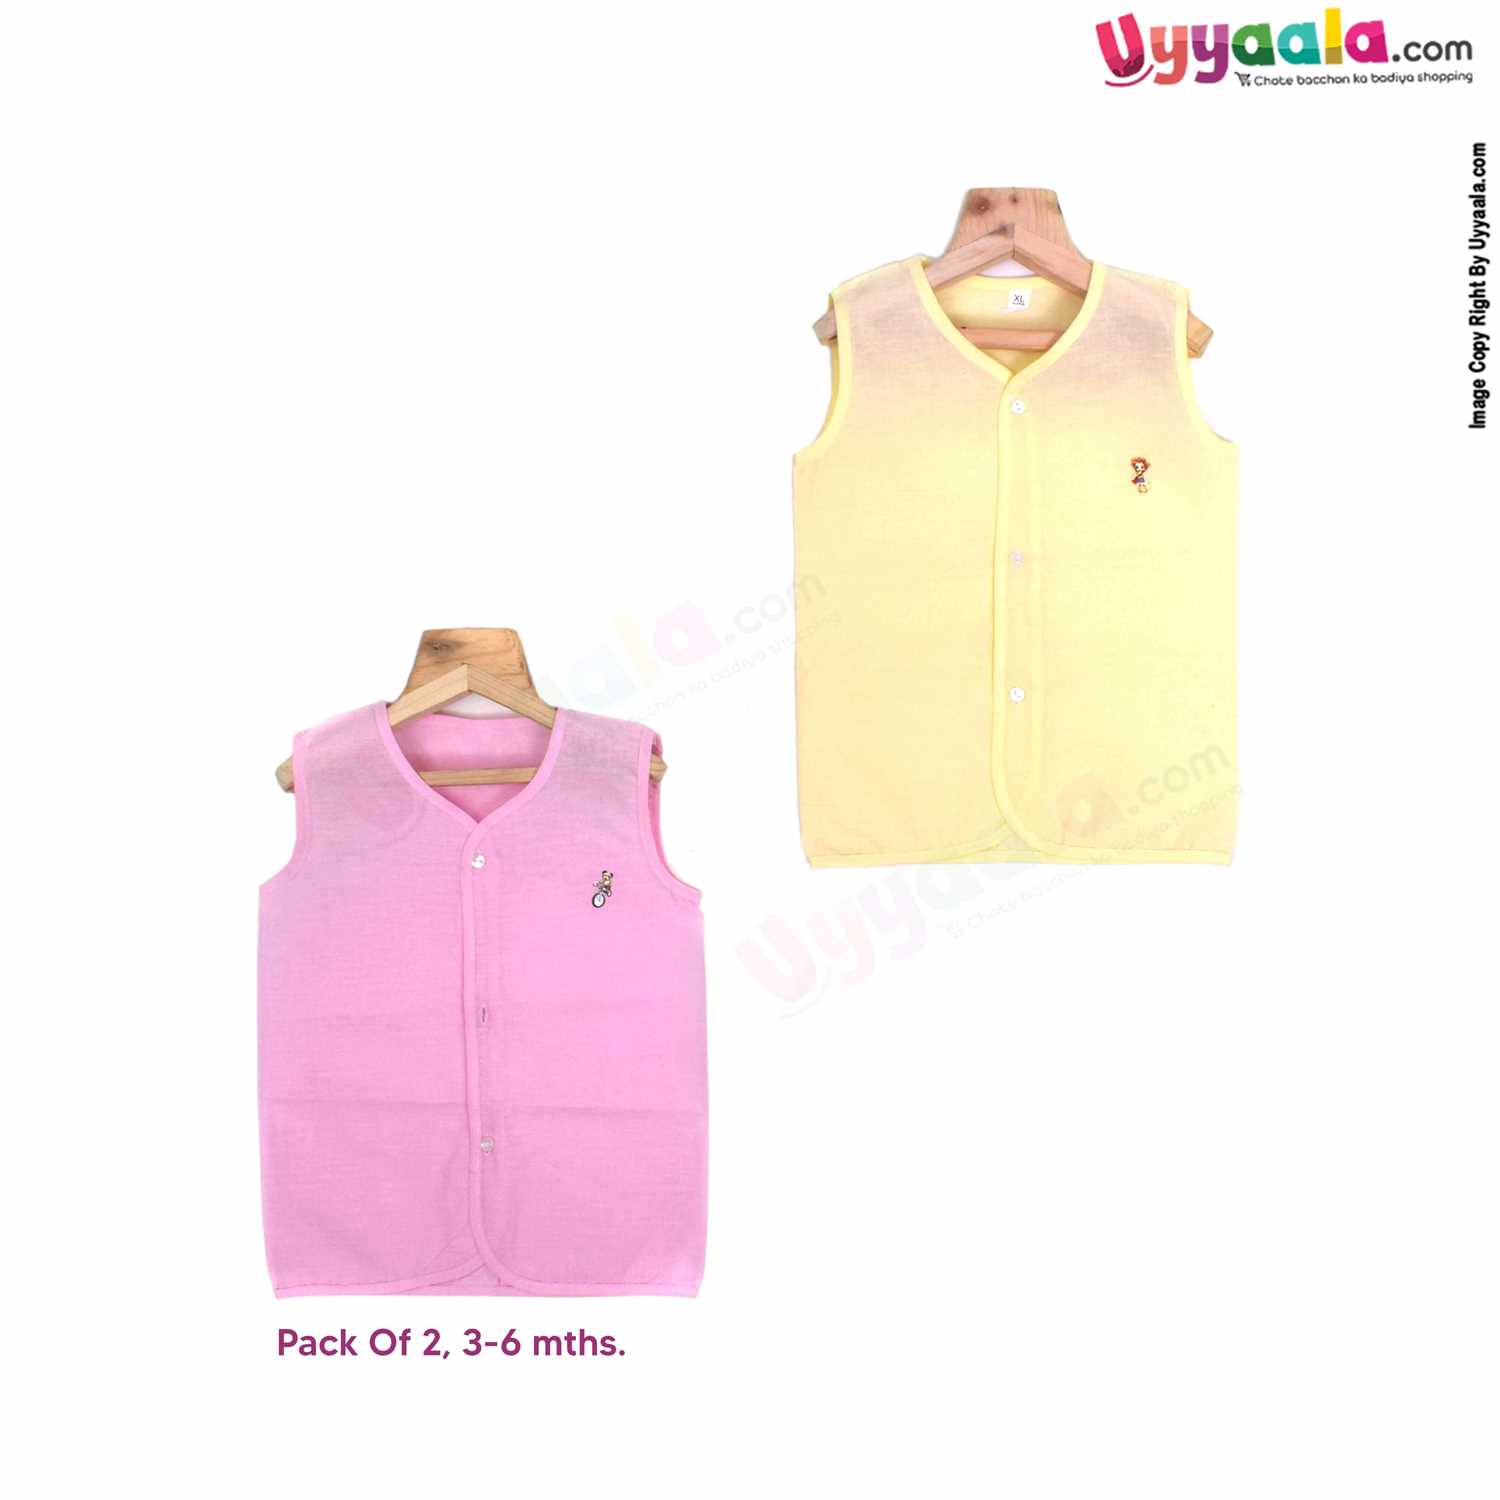 POLAR CUBS Sleeveless Baby Jabla Set, Front Opening Button Model, Premium Quality Cotton Baby Wear, (3-6M), 2Pack - Pink & Yellow